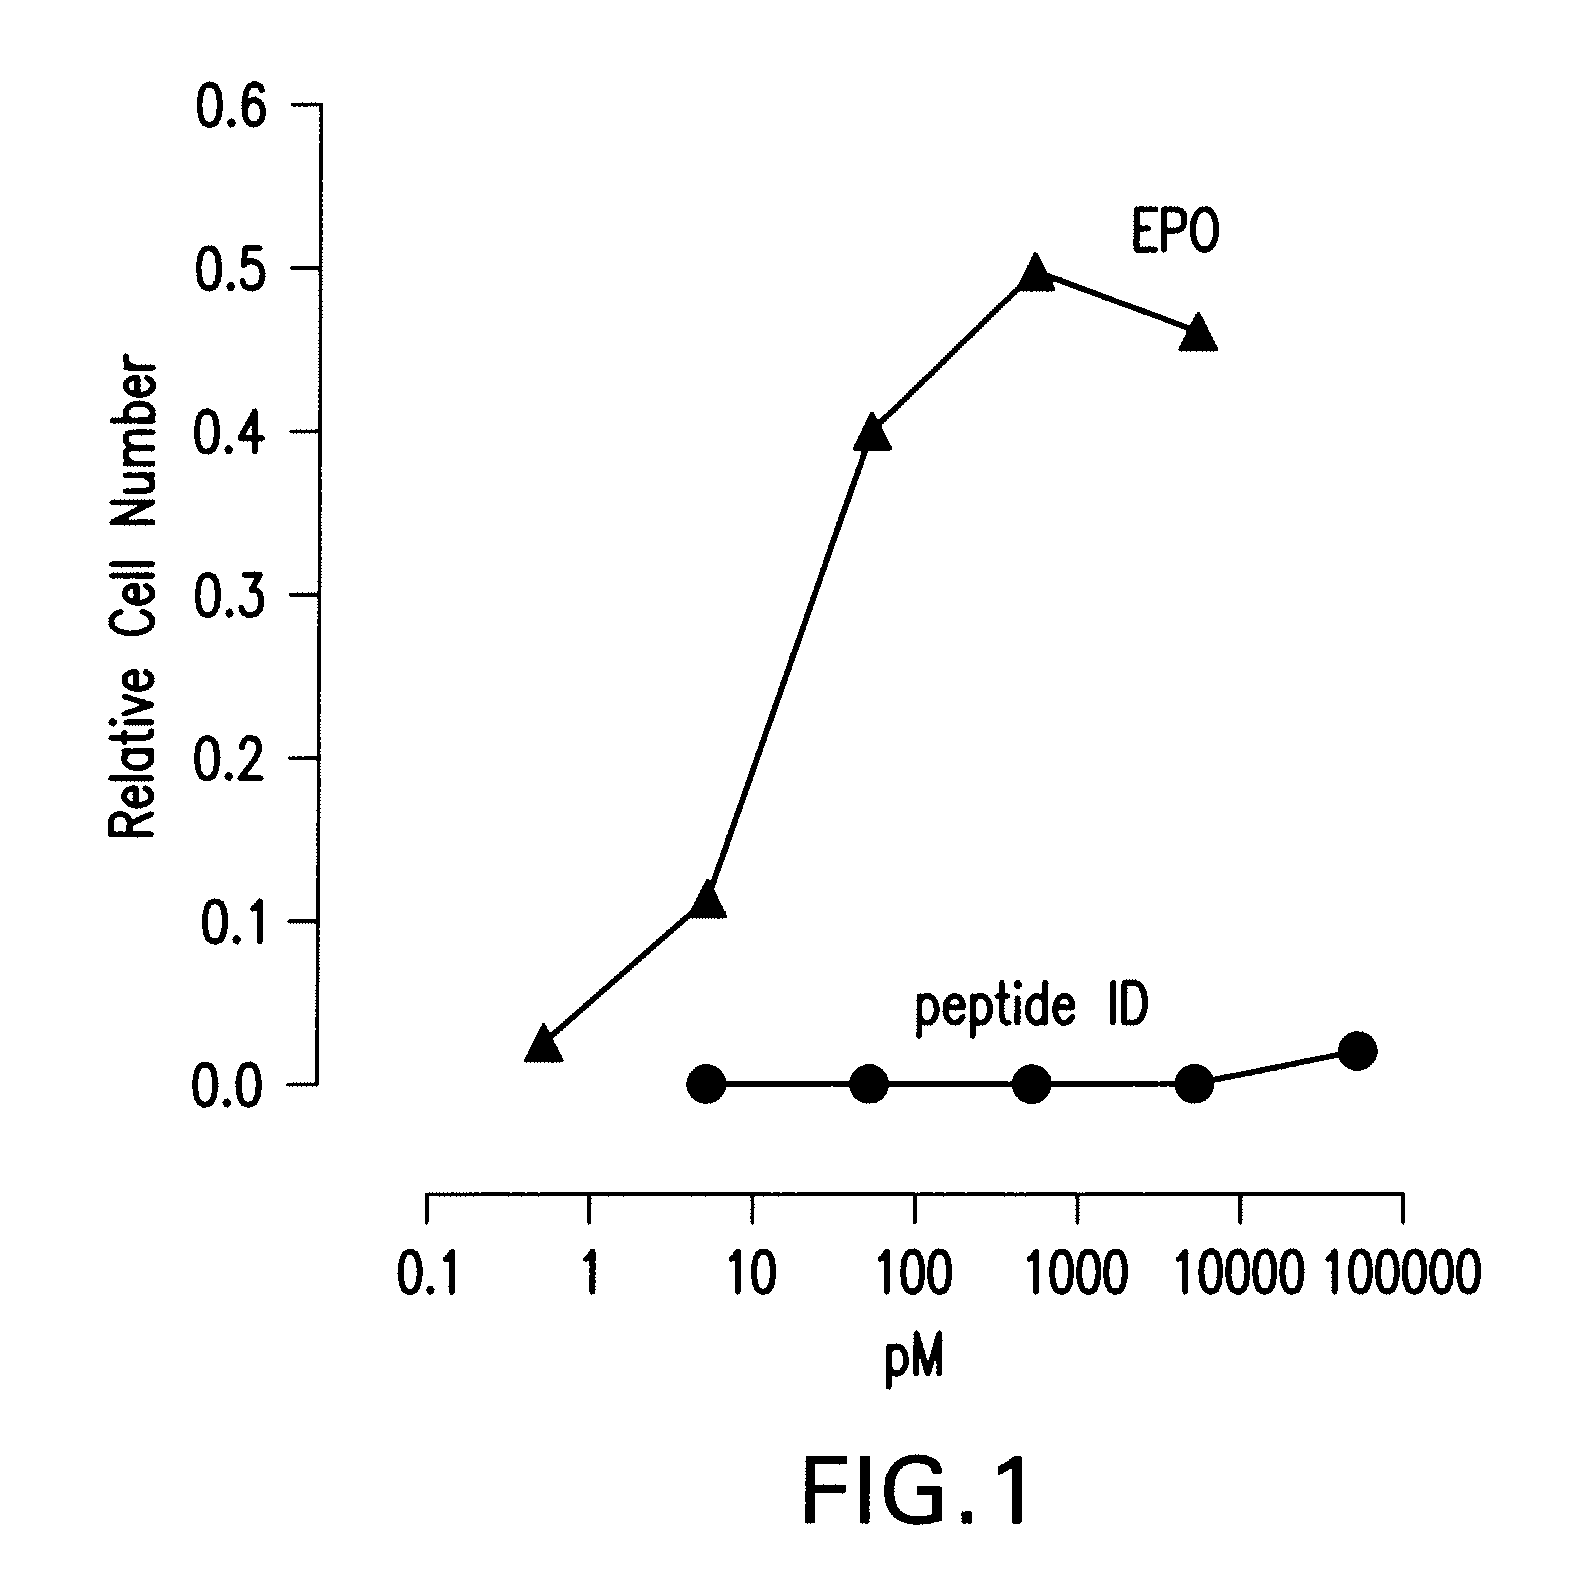 Tissue protective peptides and peptide analogs for preventing and treating diseases and disorders associated with tissue damage